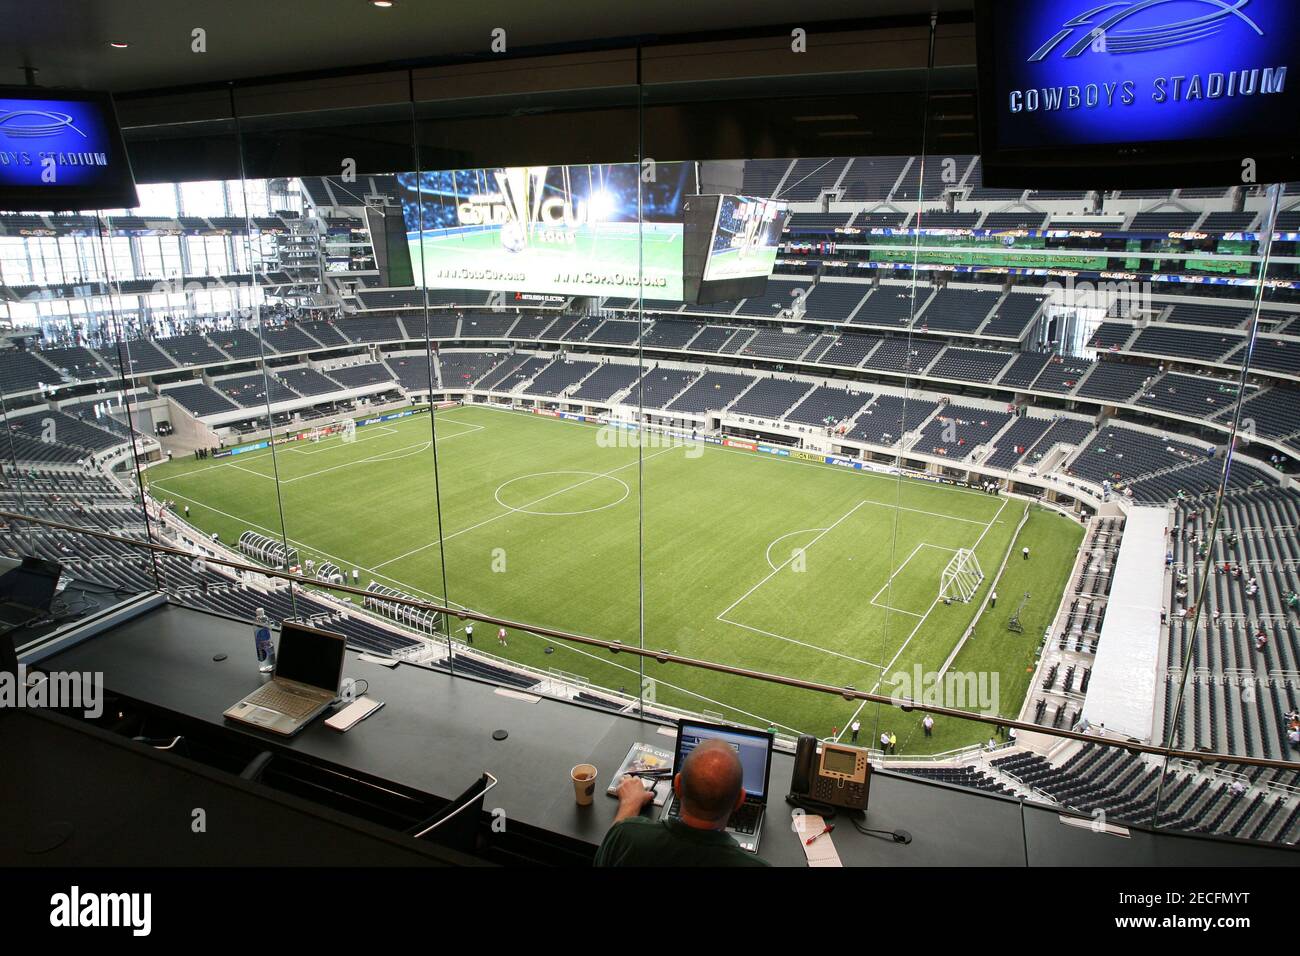 View from the press box, Dallas Cowboys Stadium during the 2009 CONCACAF soccer championship quarter-final matches on July 19 2009. Stock Photo